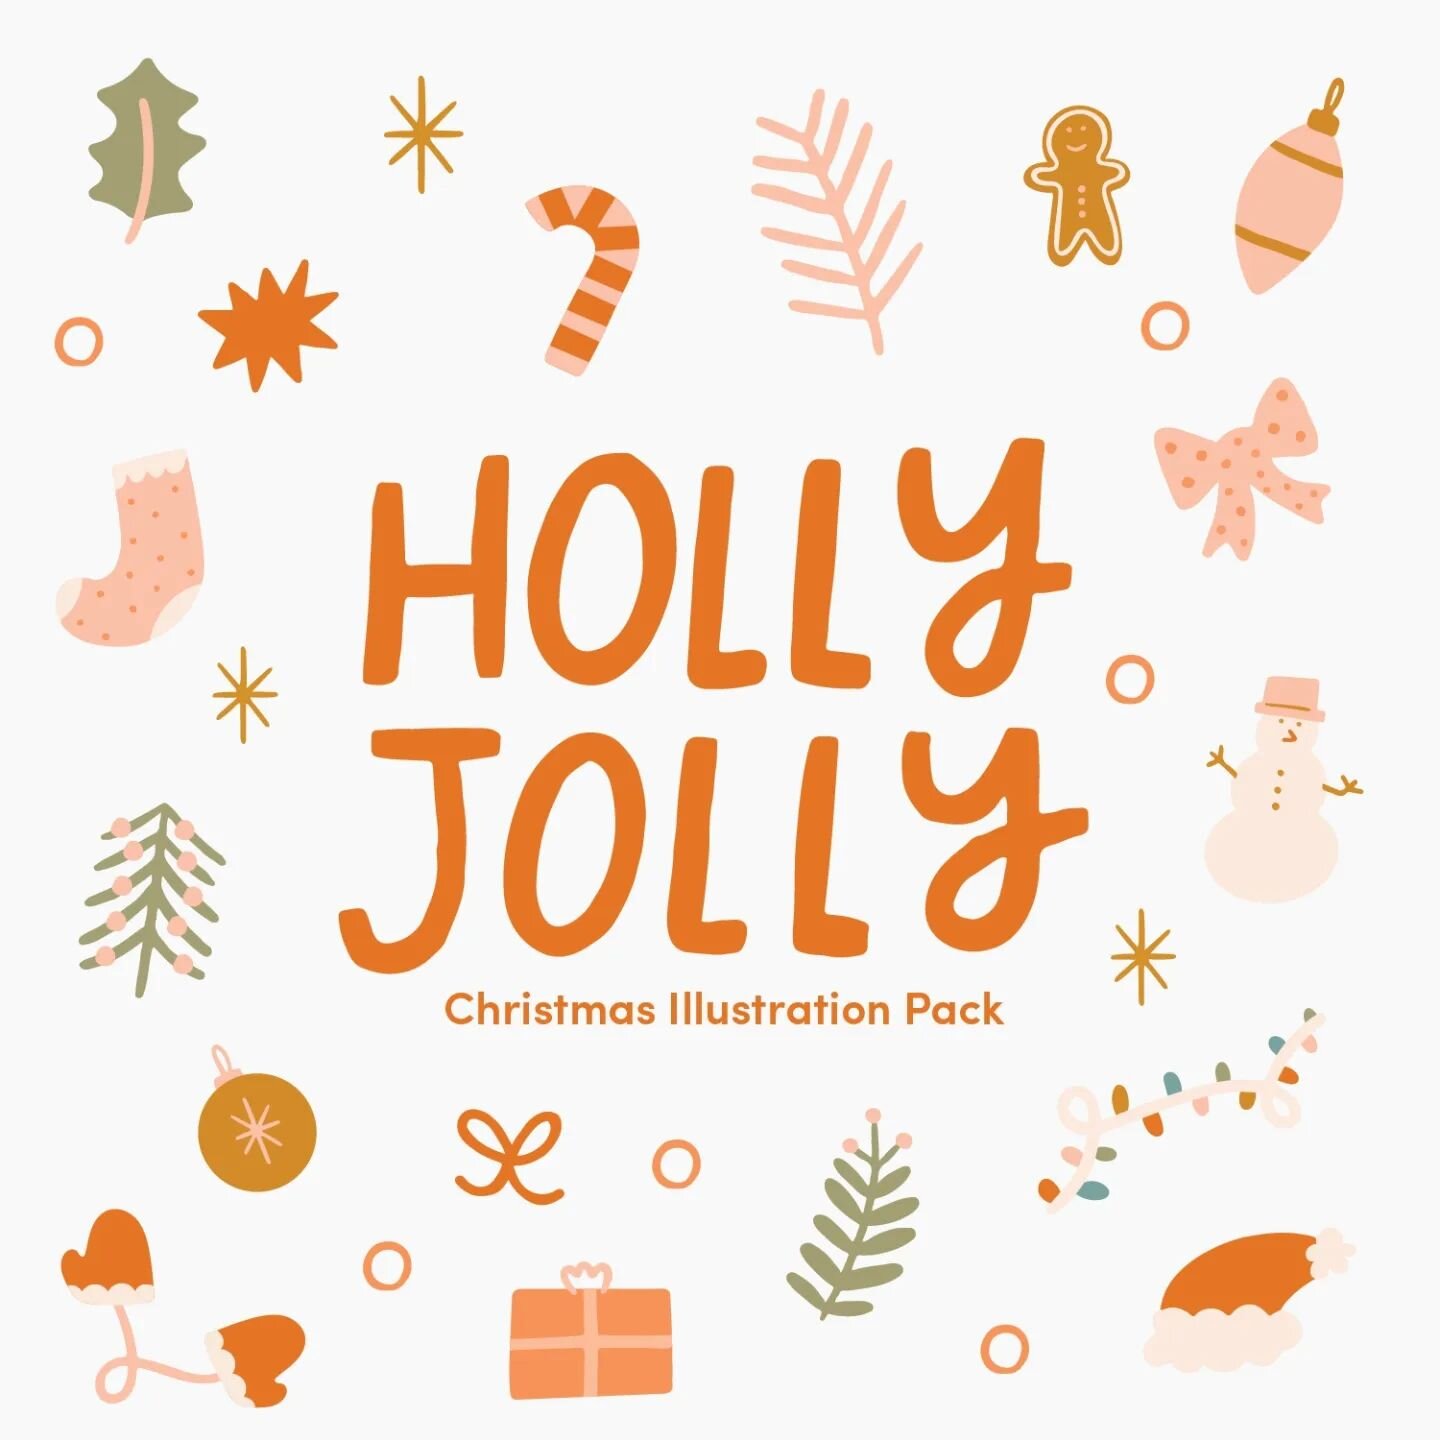 ✨NEW✨ The Holly Jolly illustration bundle. Comes with:
.
🌲20 holiday vector illustrations
🌲Hand-lettered vector holiday phrases
🌲8 Seamless patterns.
.
Click link in bio to add some Christmas cheer to your next creative project.
.
Commercial licen